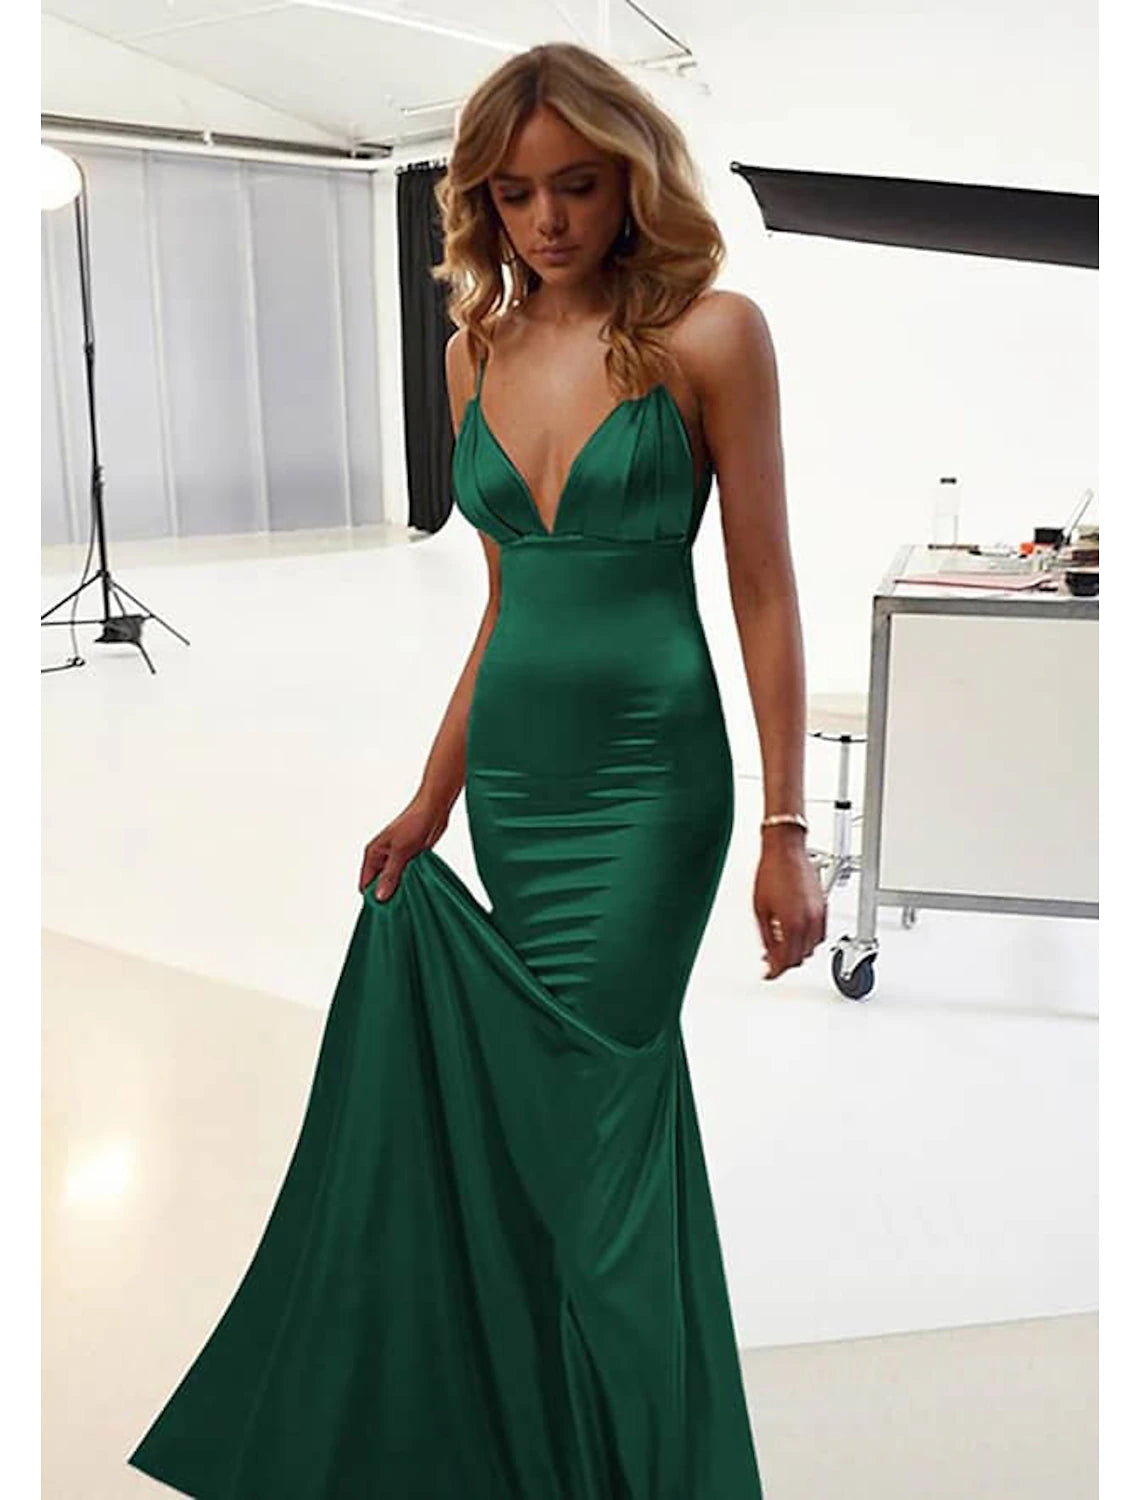 Wholesa Mermaid / Trumpet Wedding Guest Dresses Sexy Dress Prom Black Tie Gala Floor Length Sleeveless Spaghetti Strap Cotton Backless with Ruched